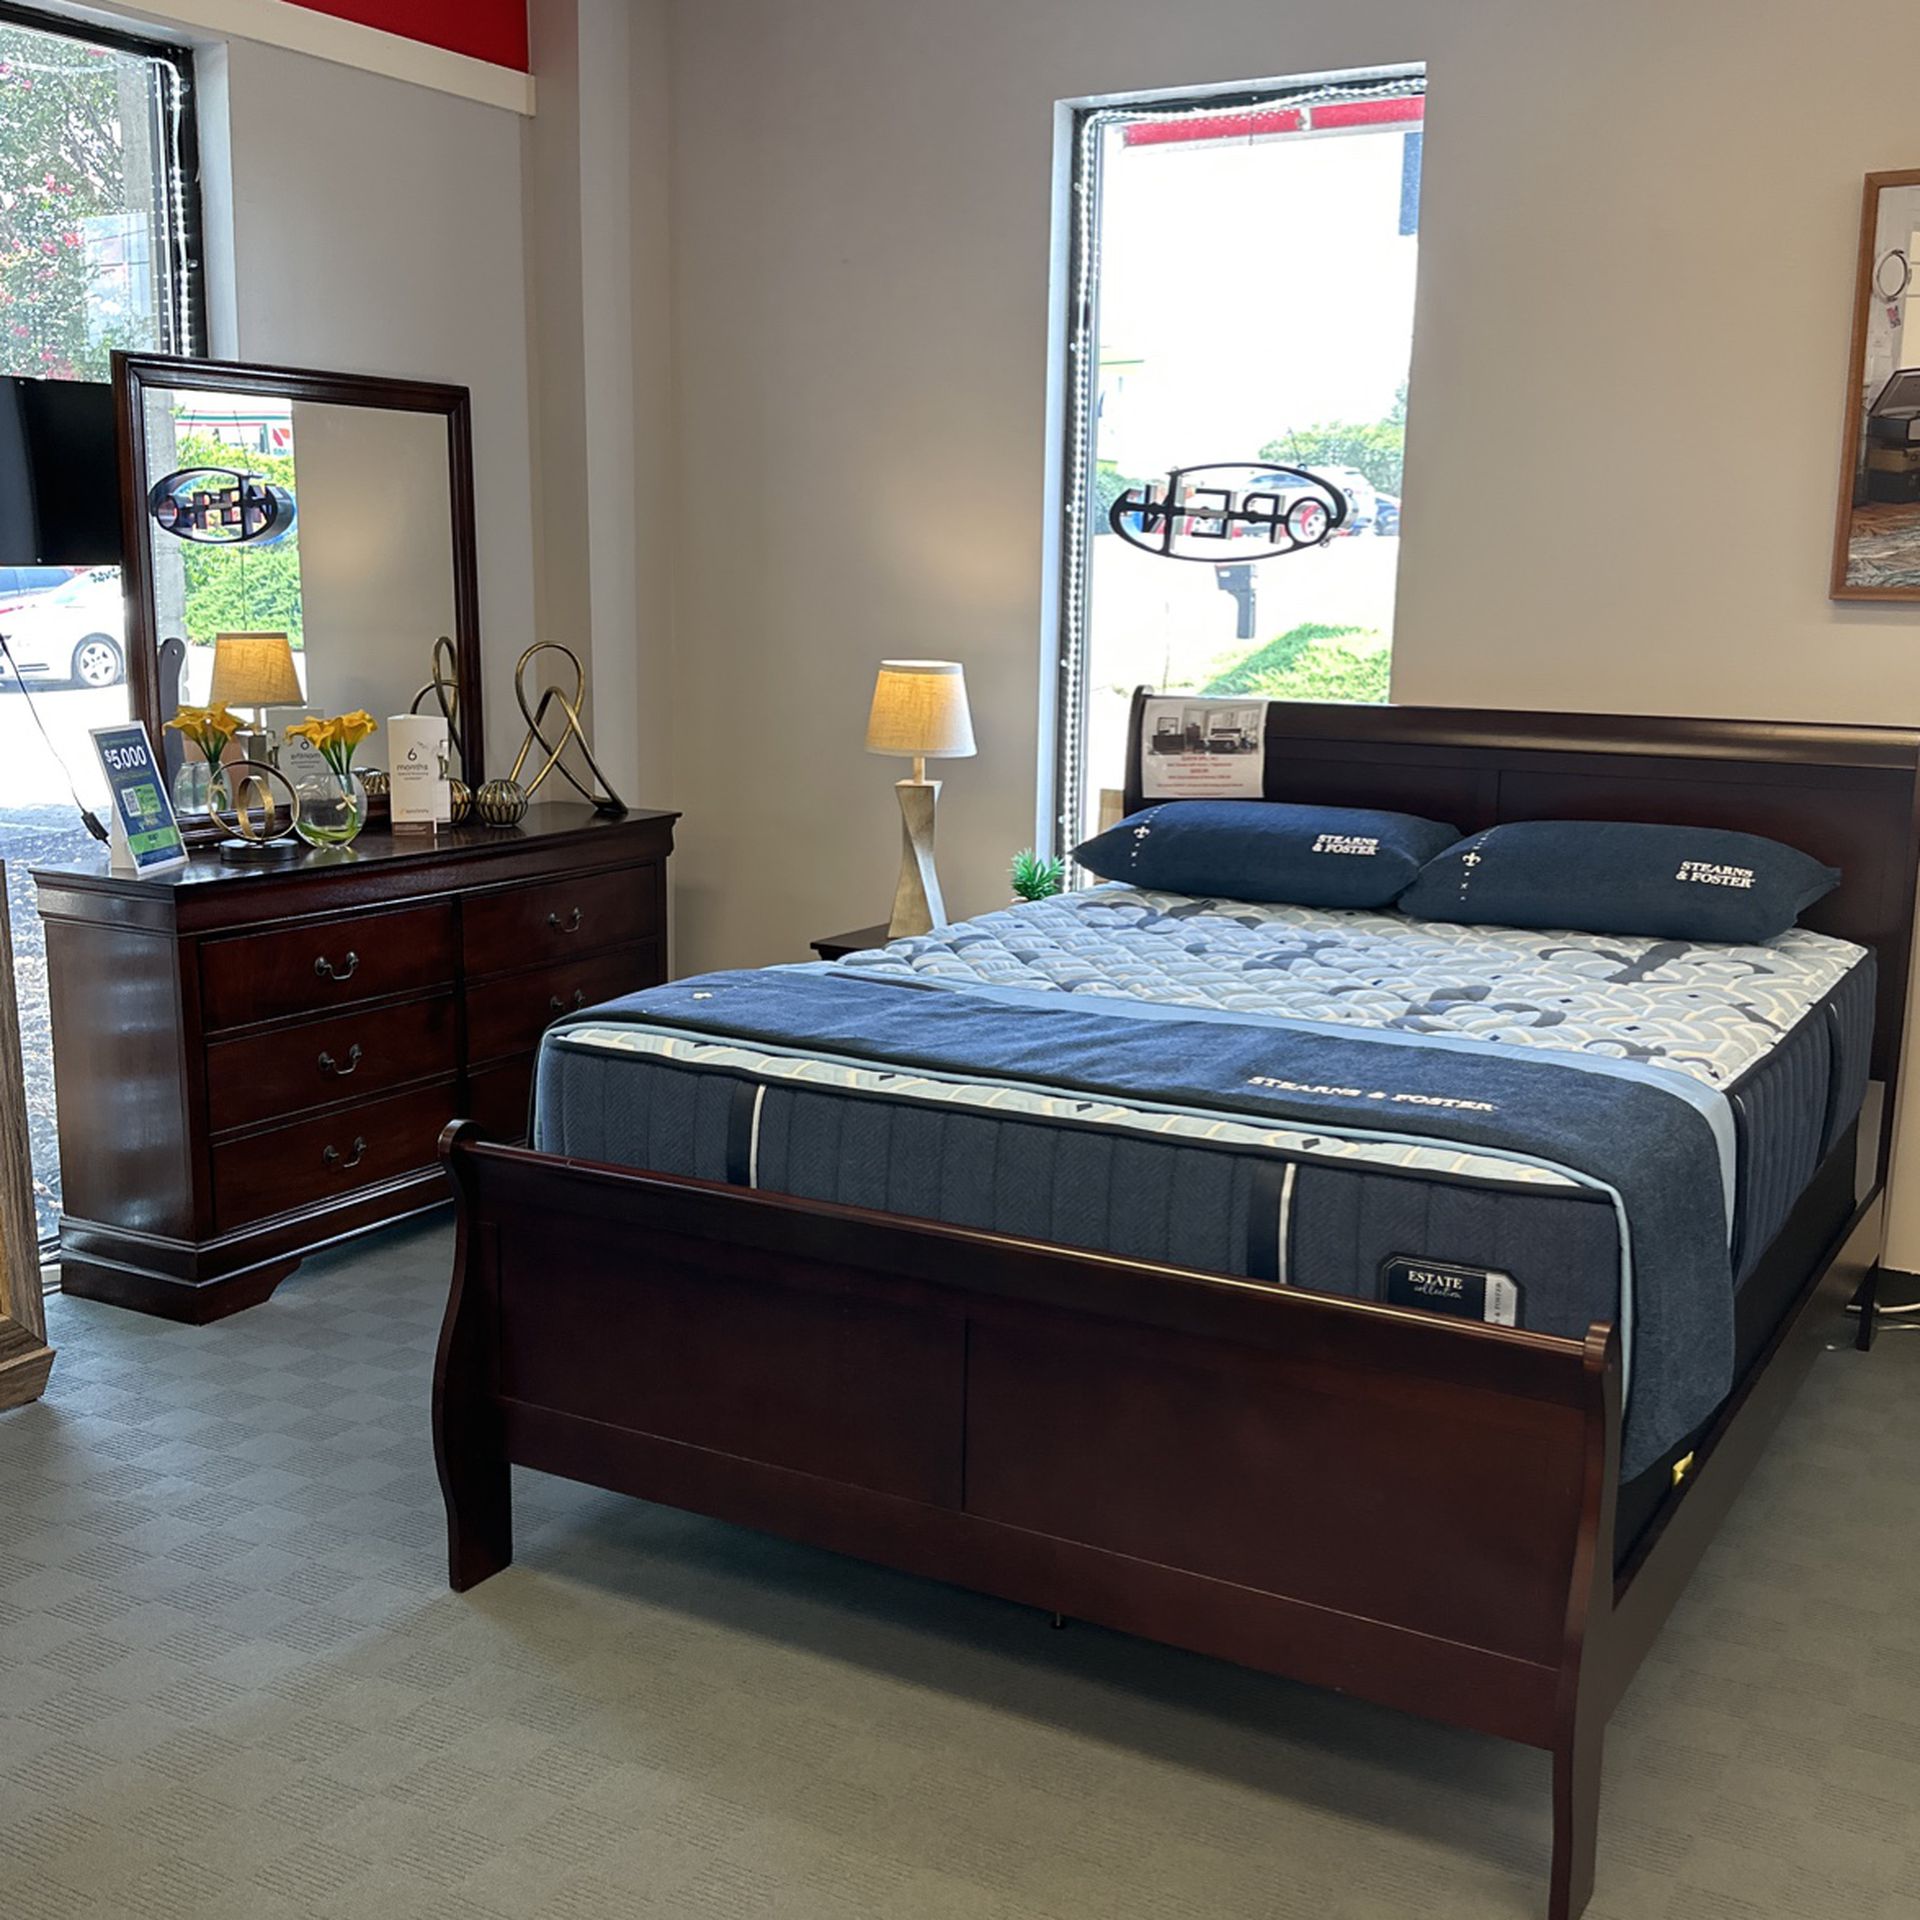 Queen Sleigh Bed - Furniture Also Available - Mattresses